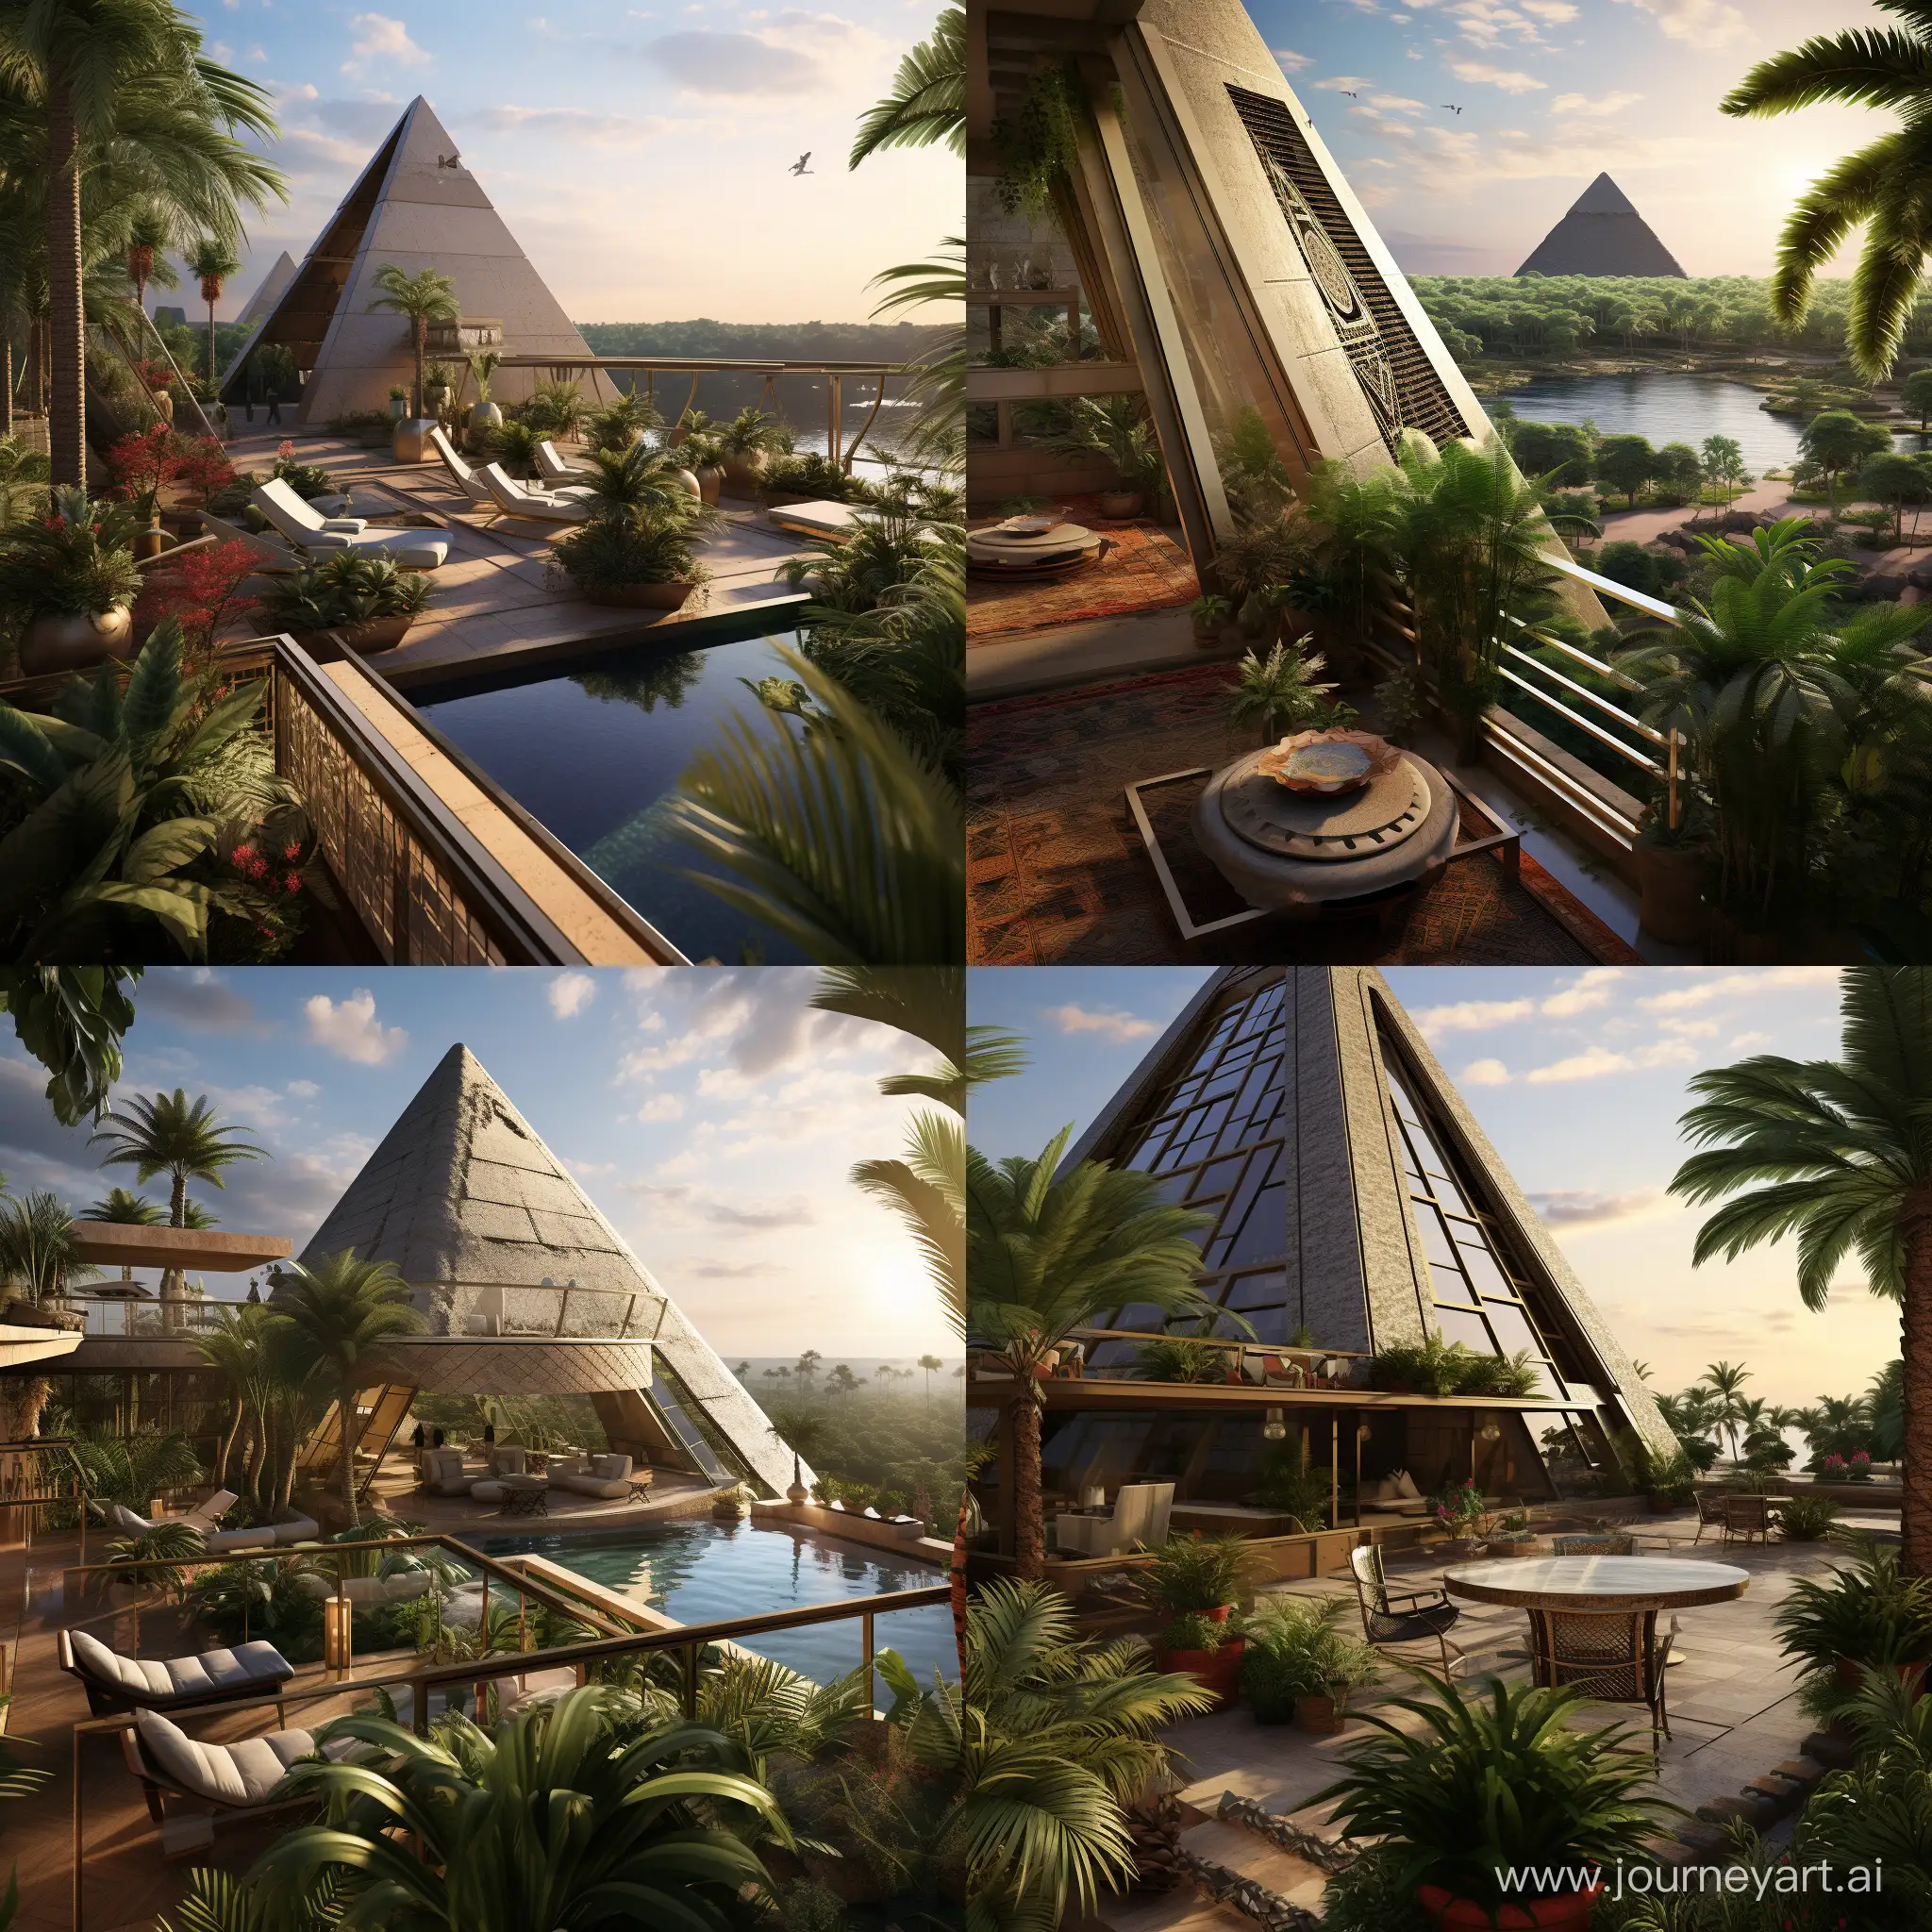 Egyptian-Pyramids-Balcony-and-Garden-Addition-Ancient-Architectural-Marvel-Enhanced-with-Outdoor-Oasis